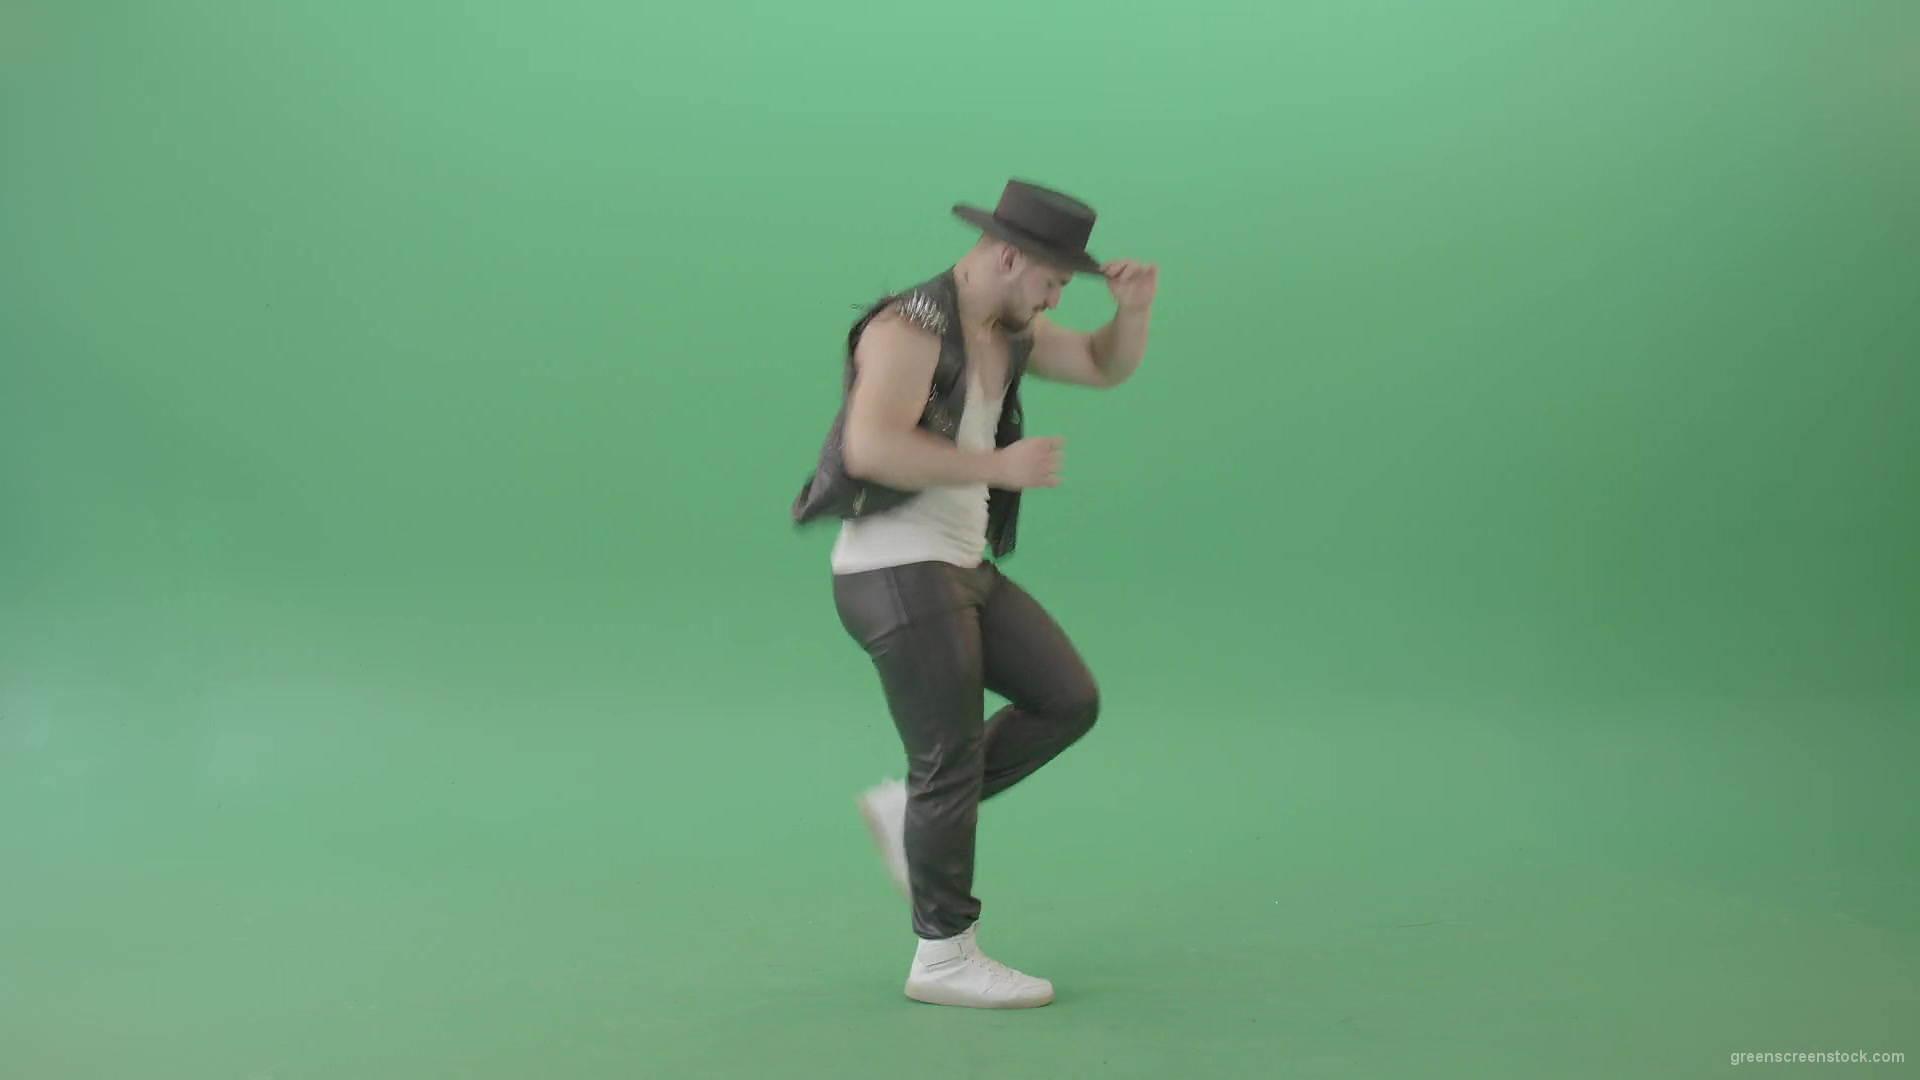 American-Man-with-beard-and-in-black-hat-dancing-Shuffle-isolated-on-Chroma-key-green-screen-4K-Video-Footage-1920_007 Green Screen Stock